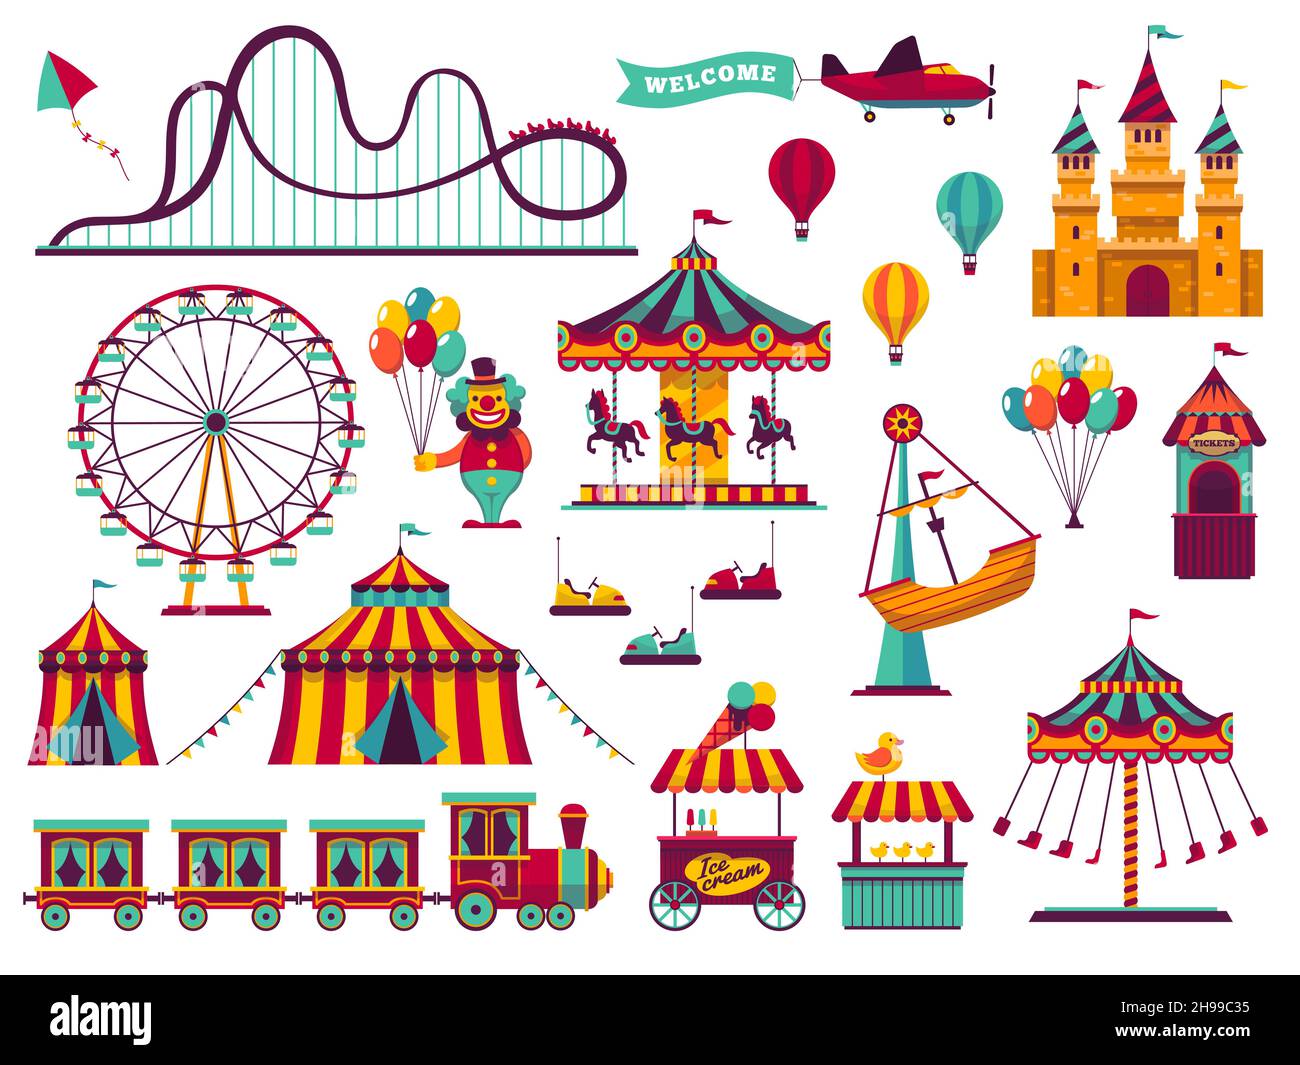 Amusement park attractions set. Carnival amuse kids carousels games fairground attraction play rollercoaster Stock Vector